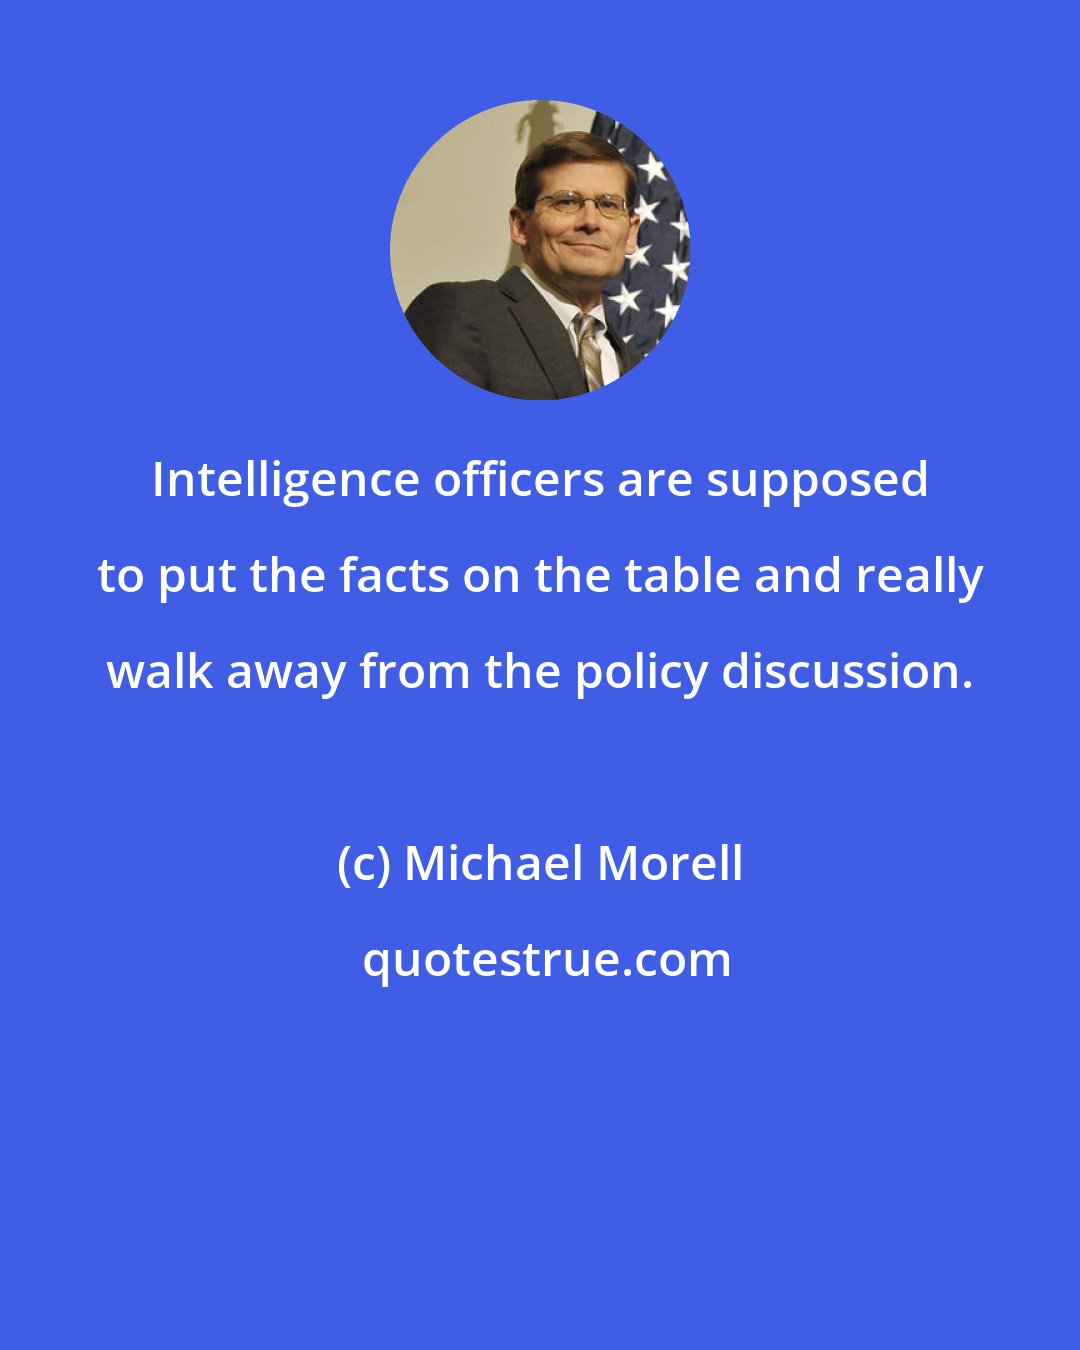 Michael Morell: Intelligence officers are supposed to put the facts on the table and really walk away from the policy discussion.